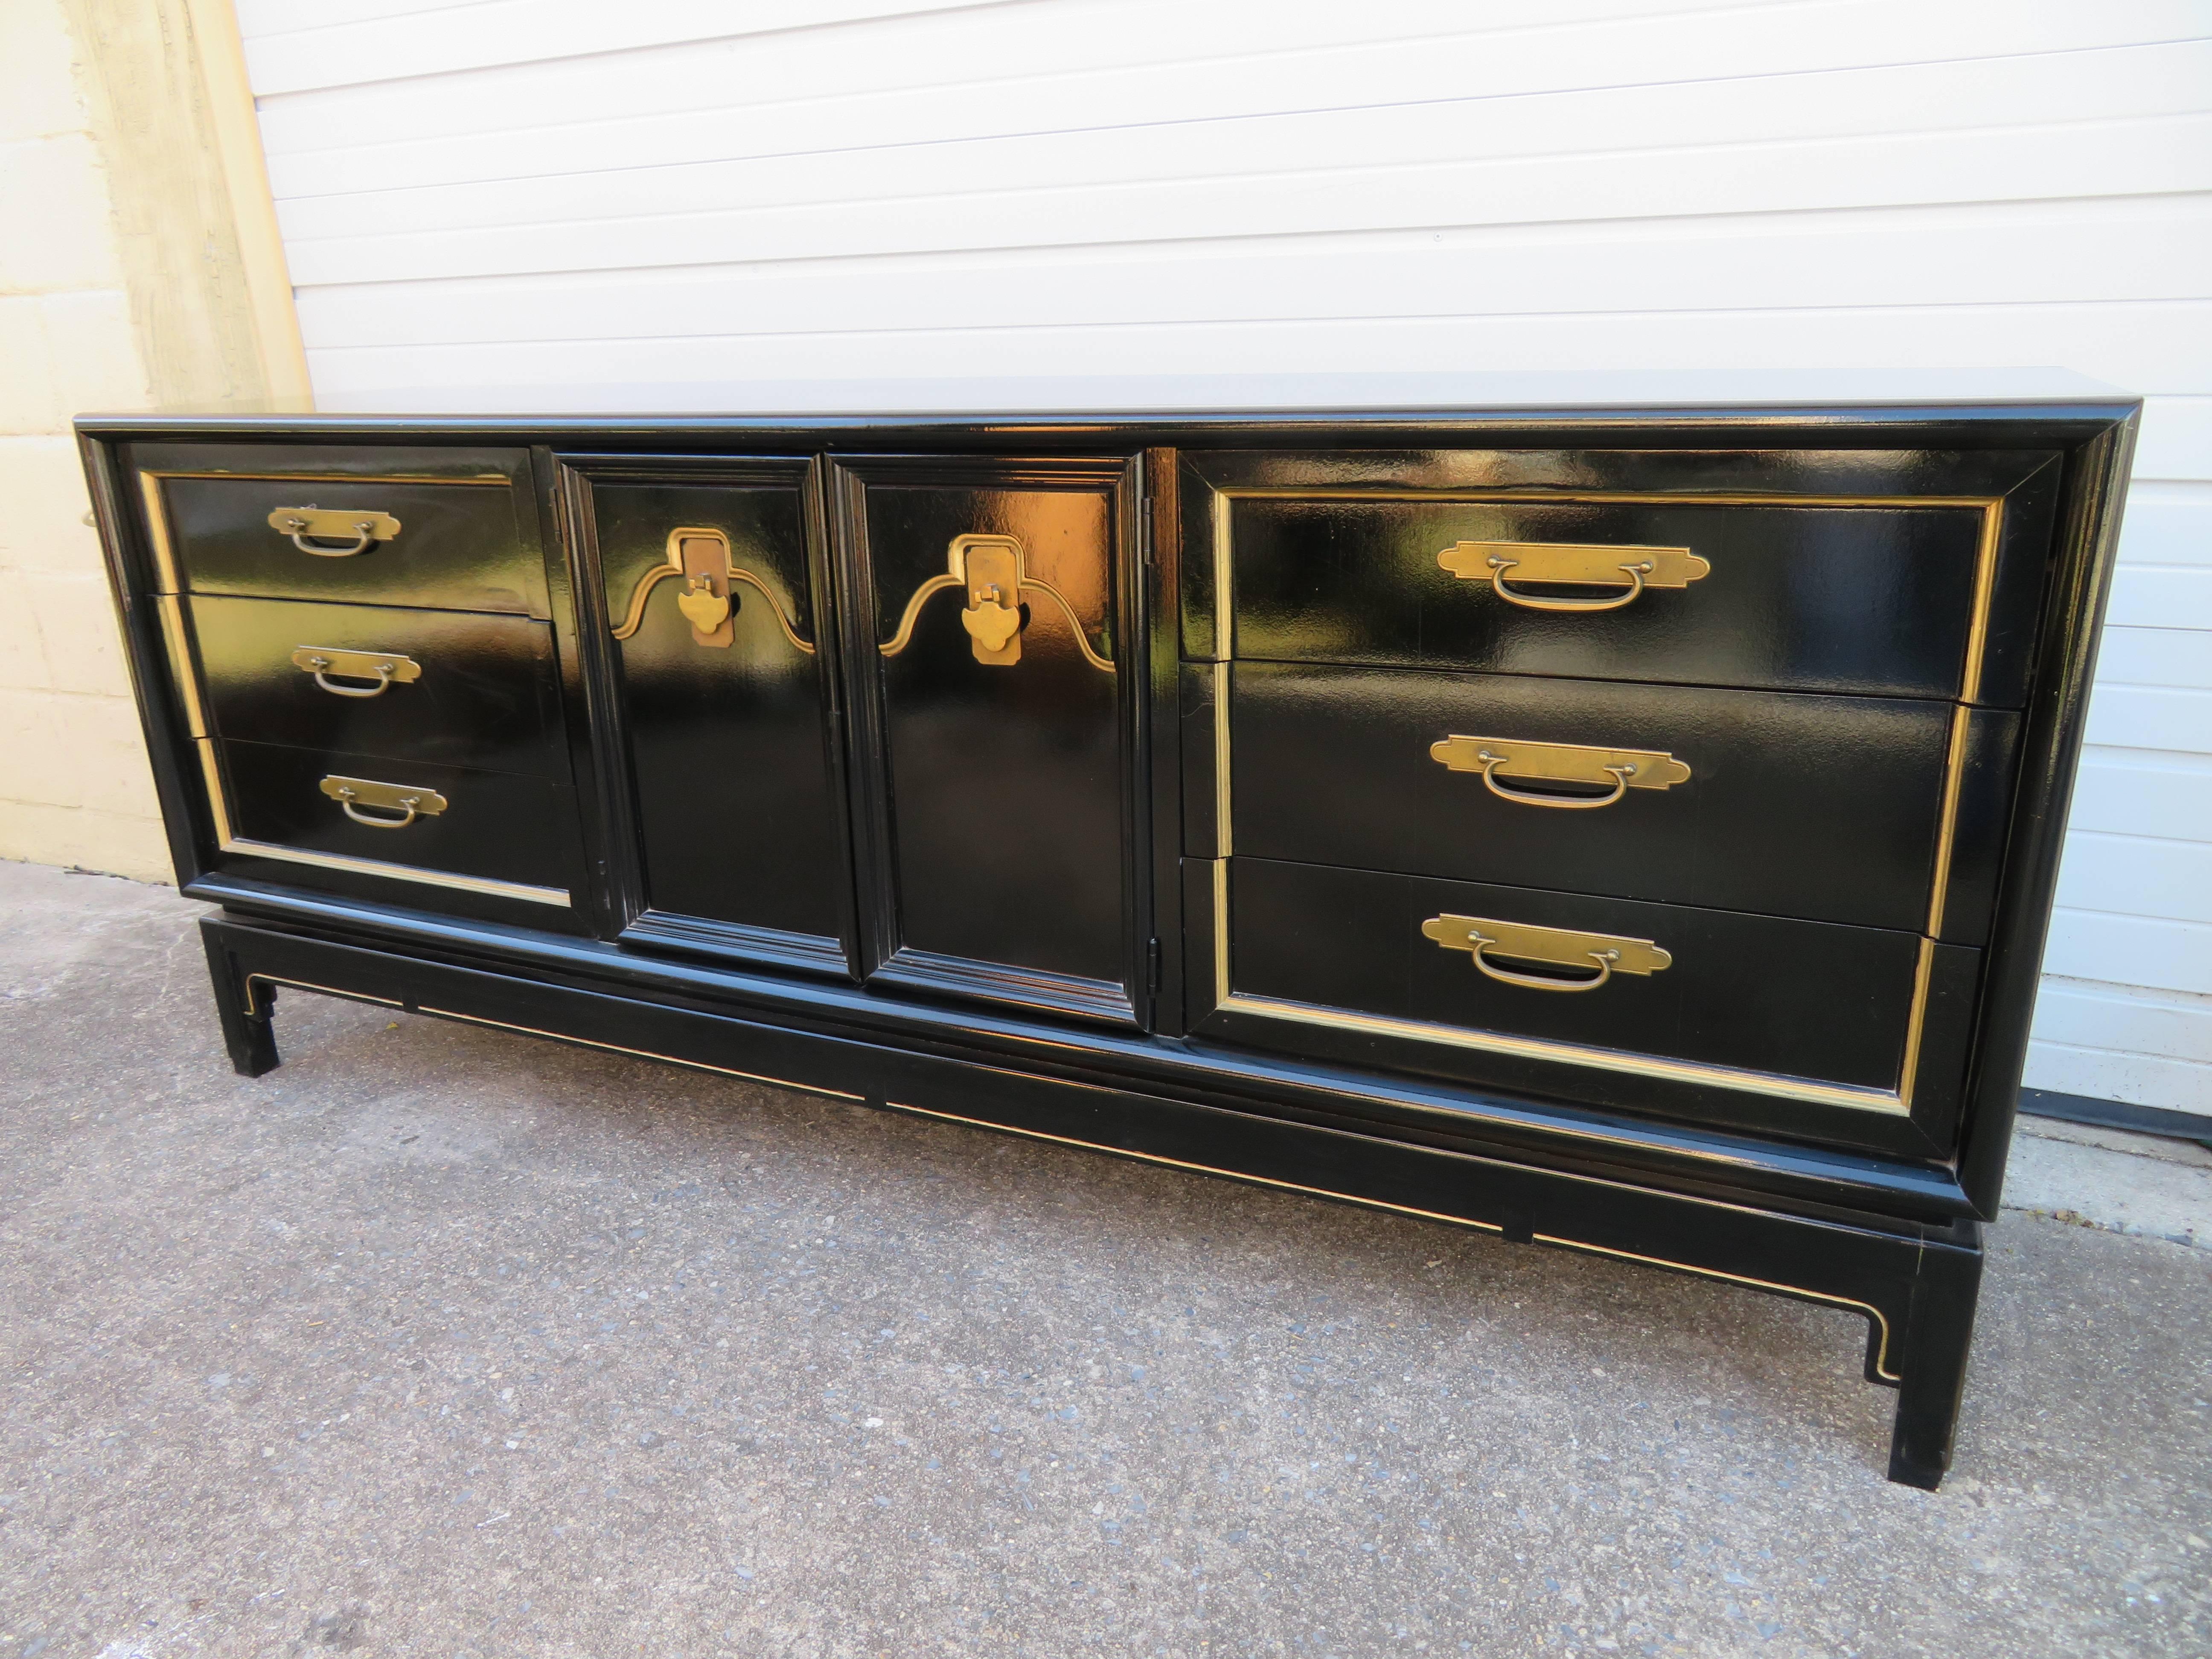 Stunning chinoiserie style black lacquered credenza with brass details. This piece is in wonderful vintage condition, the original lacquer finish still looks great.